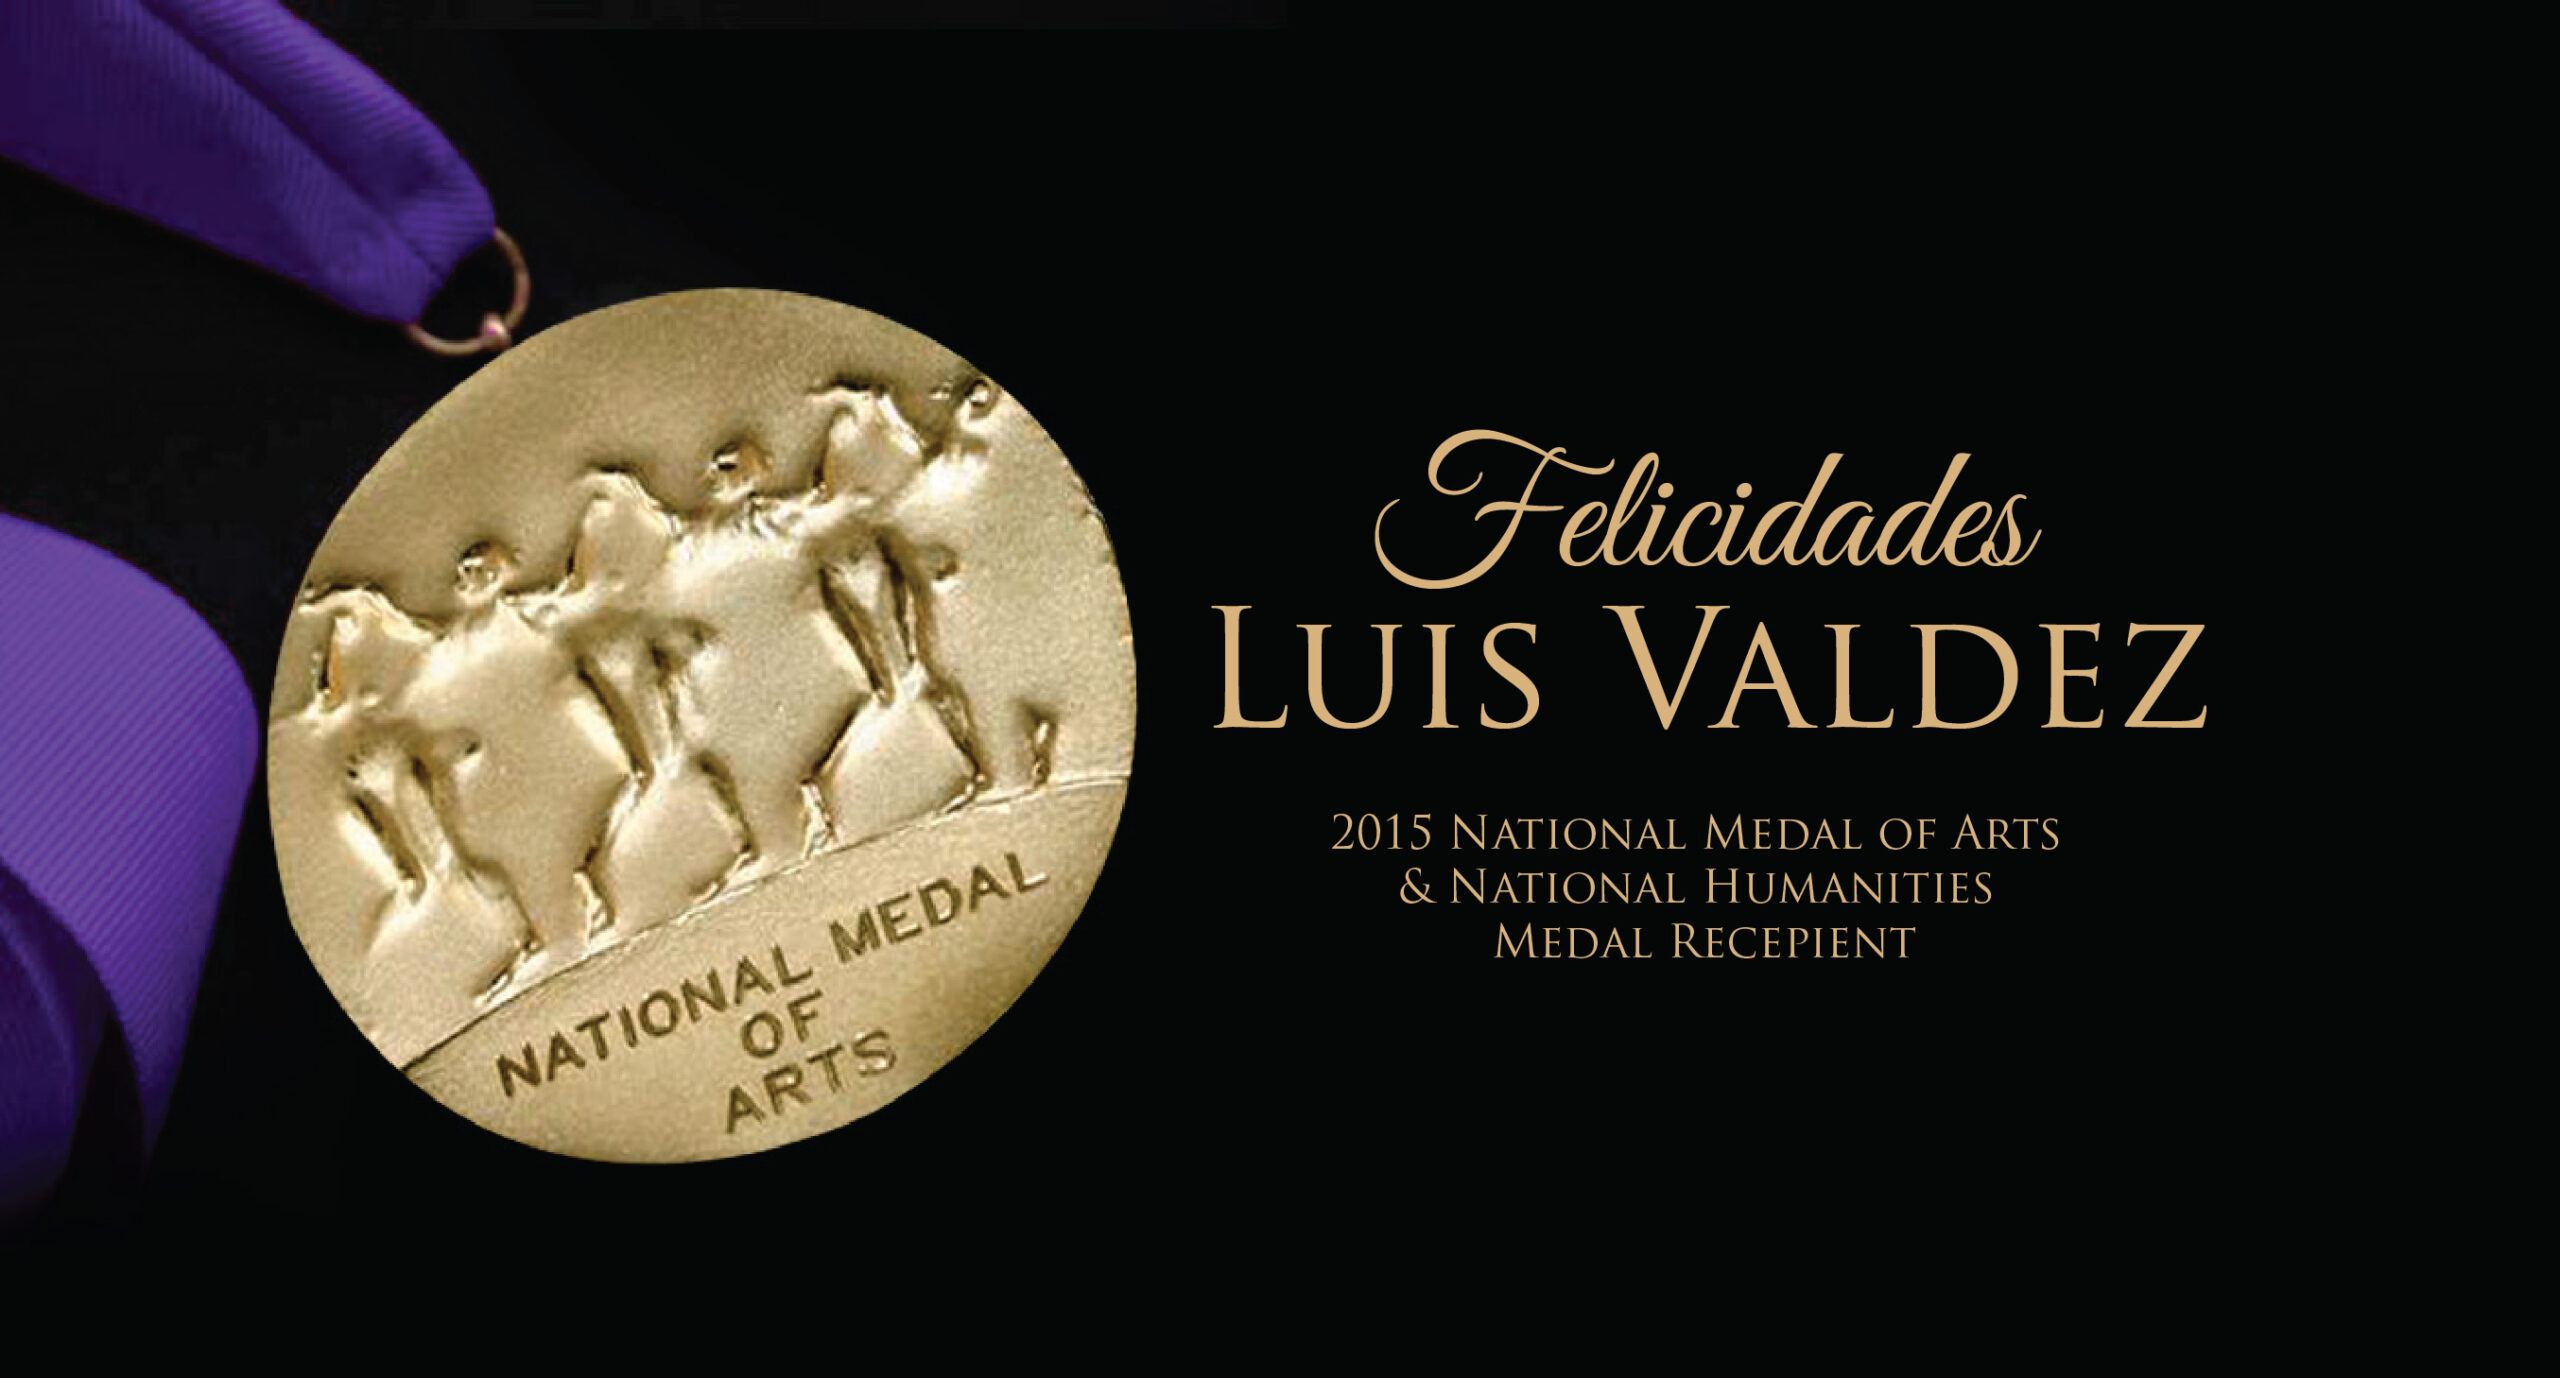 Luis Valdez to be awarded the 2015 National Medal of Arts and National Humanities by President Obama